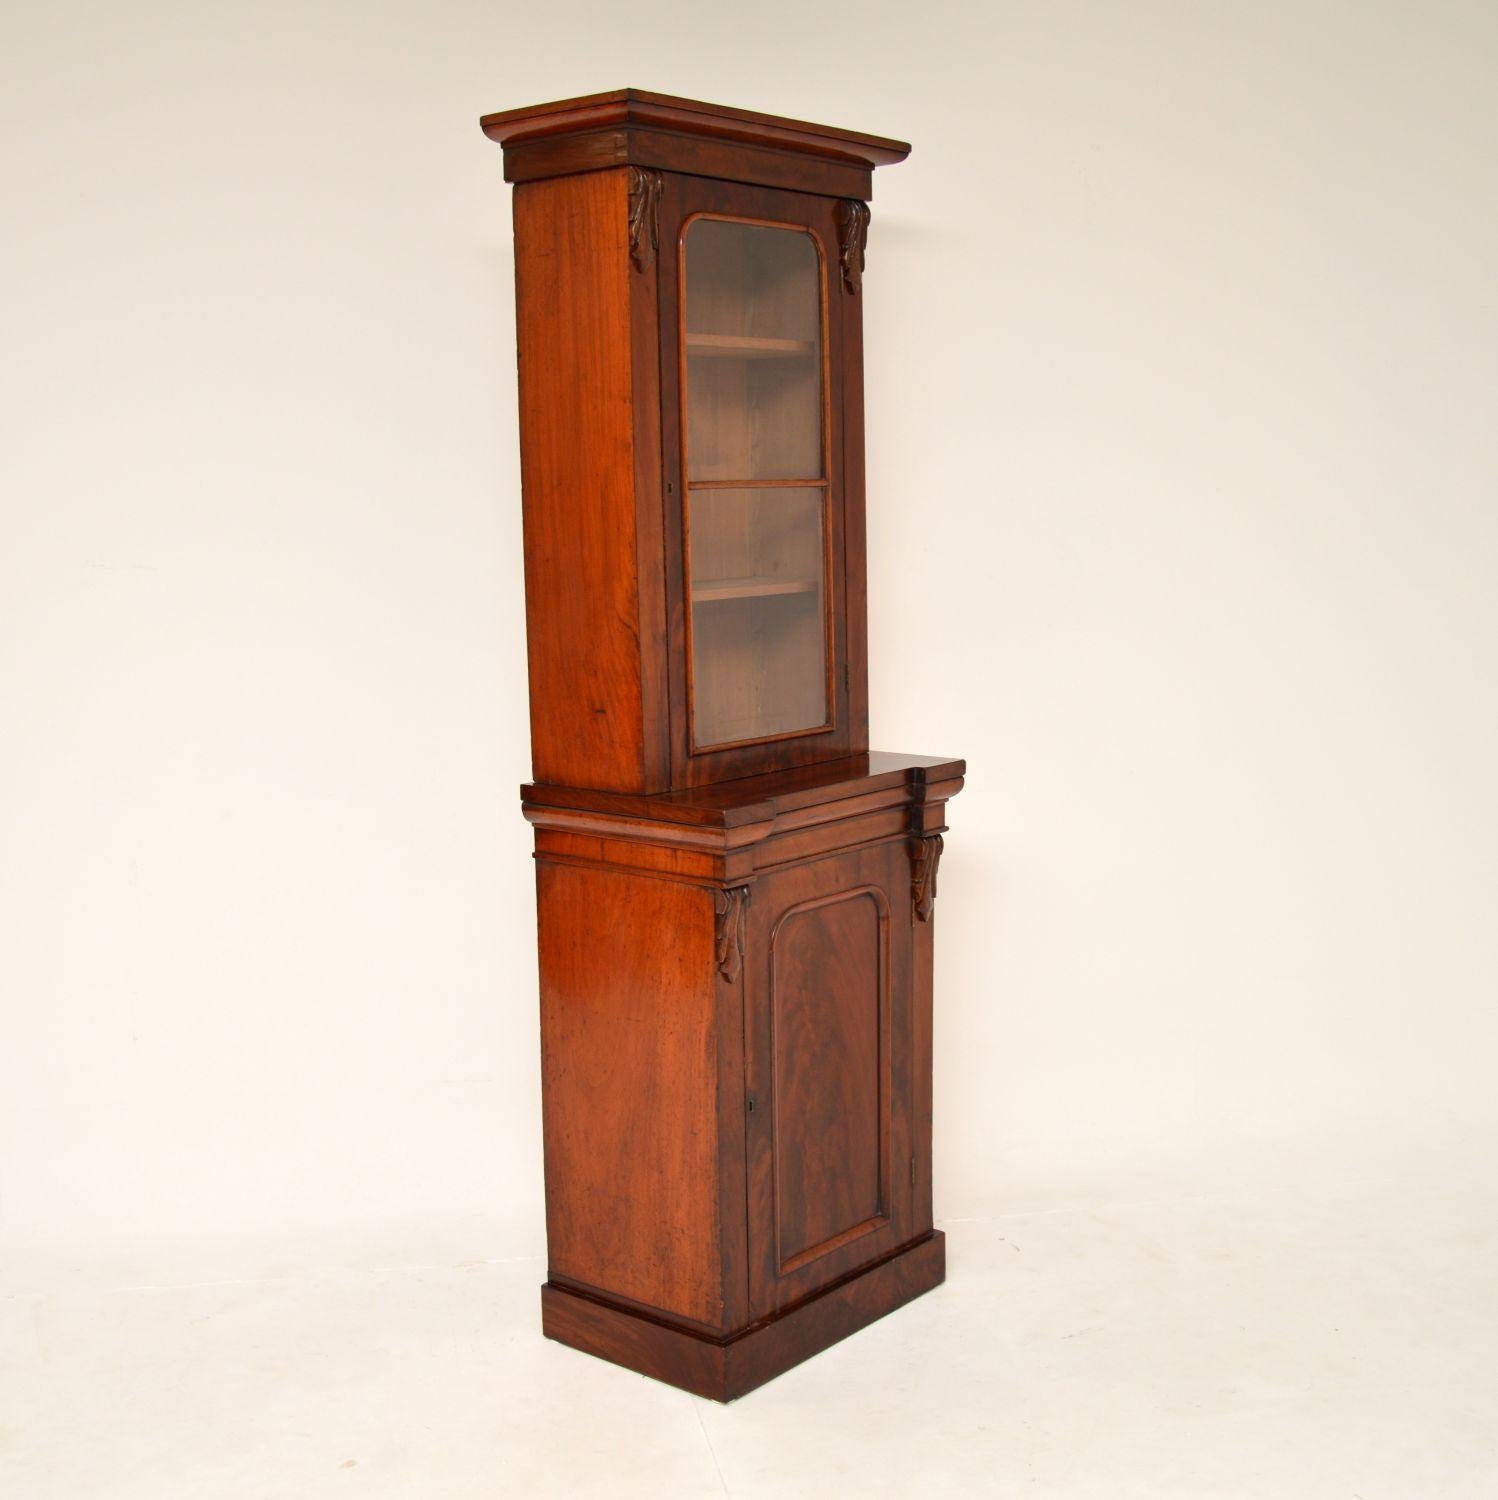 A very unusual and useful original antique Victorian bookcase. This was made in England, it dates from the 1860-80’s.

It has very slim design and takes up very little floor space, while offering plenty of storage space inside. This sits on a plinth